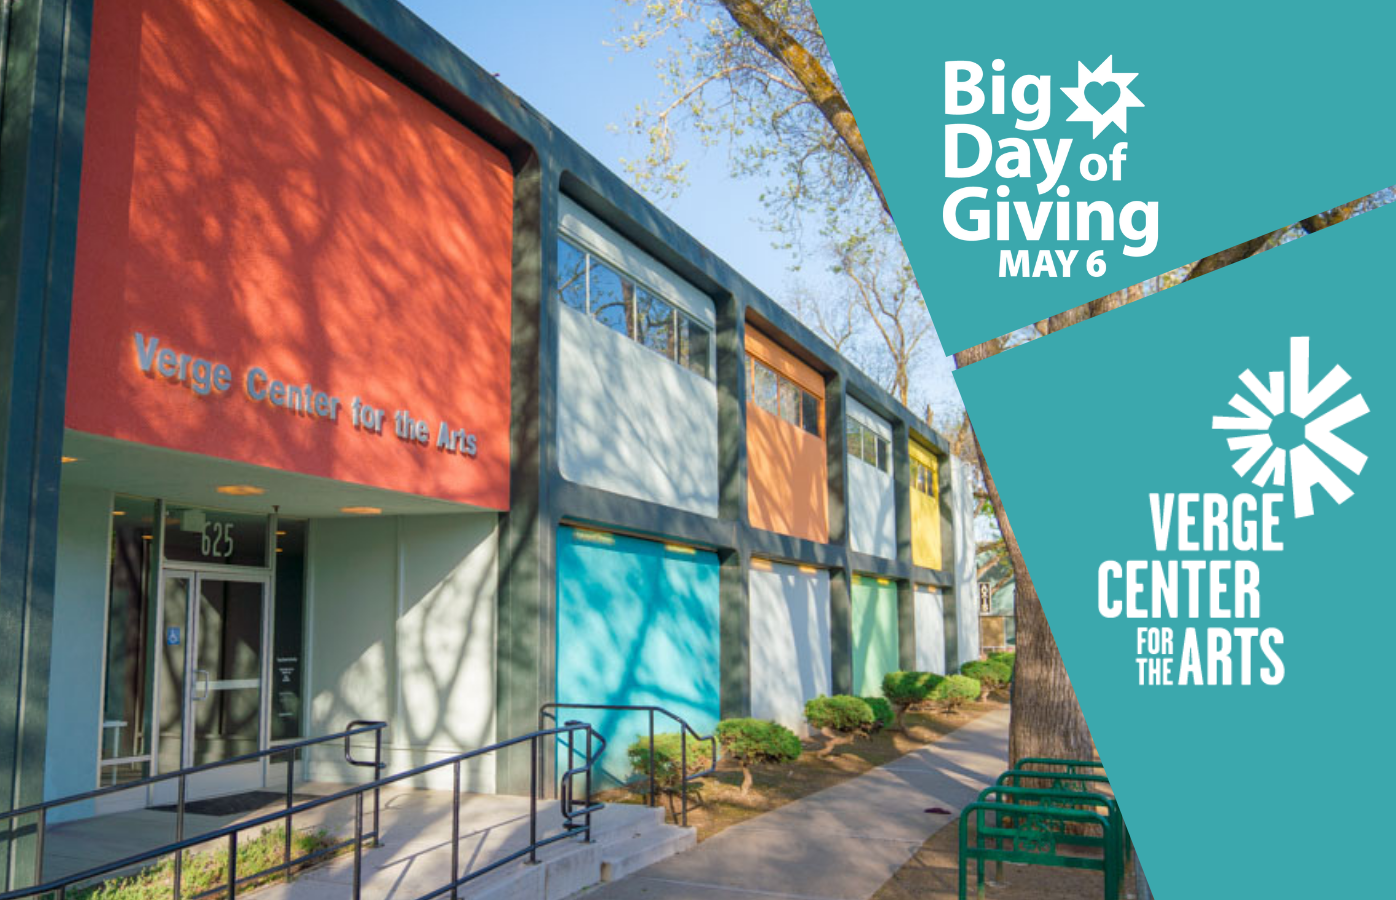 Big Day of Giving 2021 Verge Center for the Arts